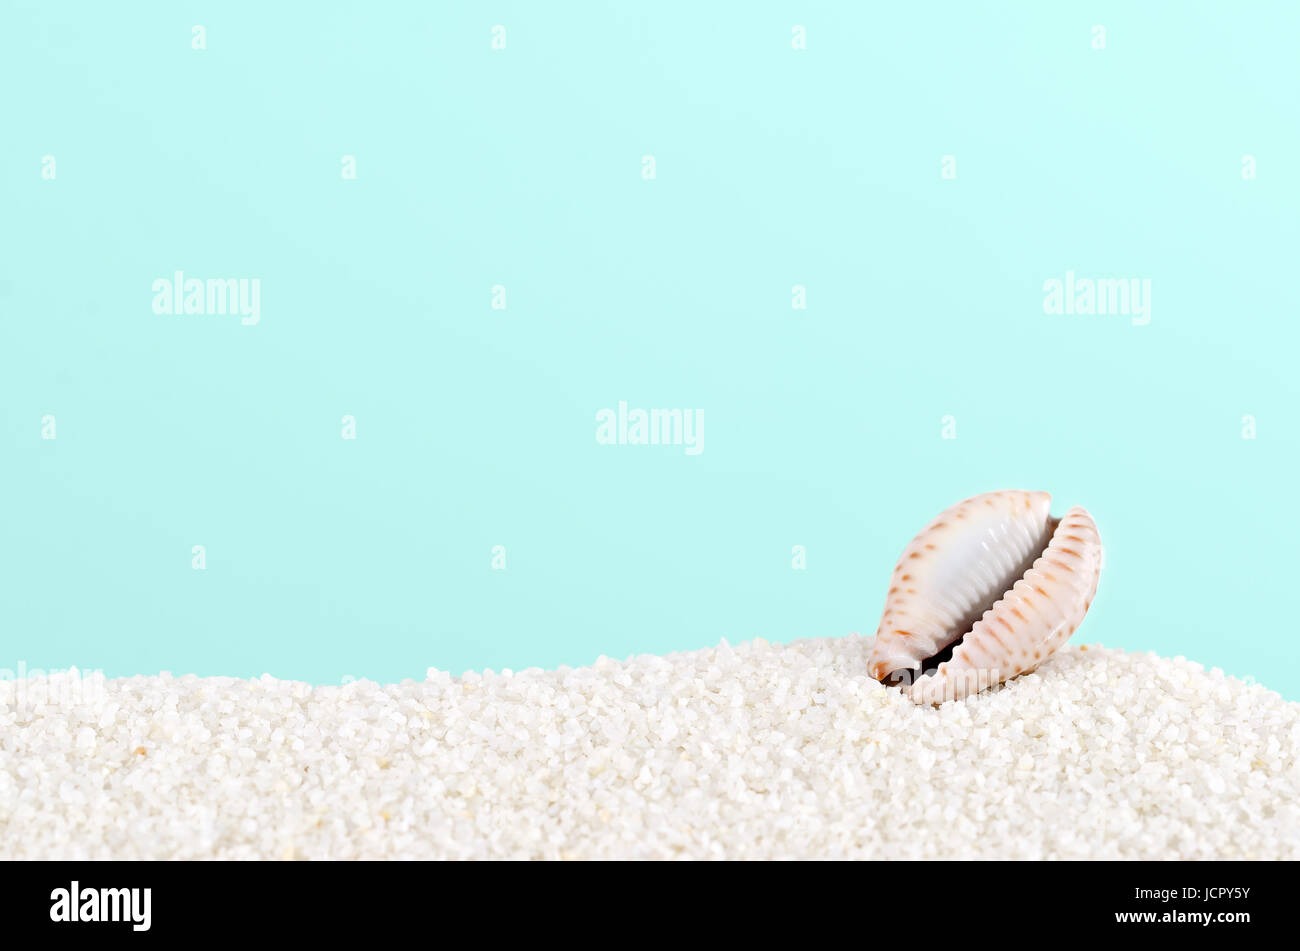 Cowrie shell on white sand on turquoise background. Sea snail, marine gastropod mollusc. Underside showing opening, aperture, toothed at edges. Stock Photo